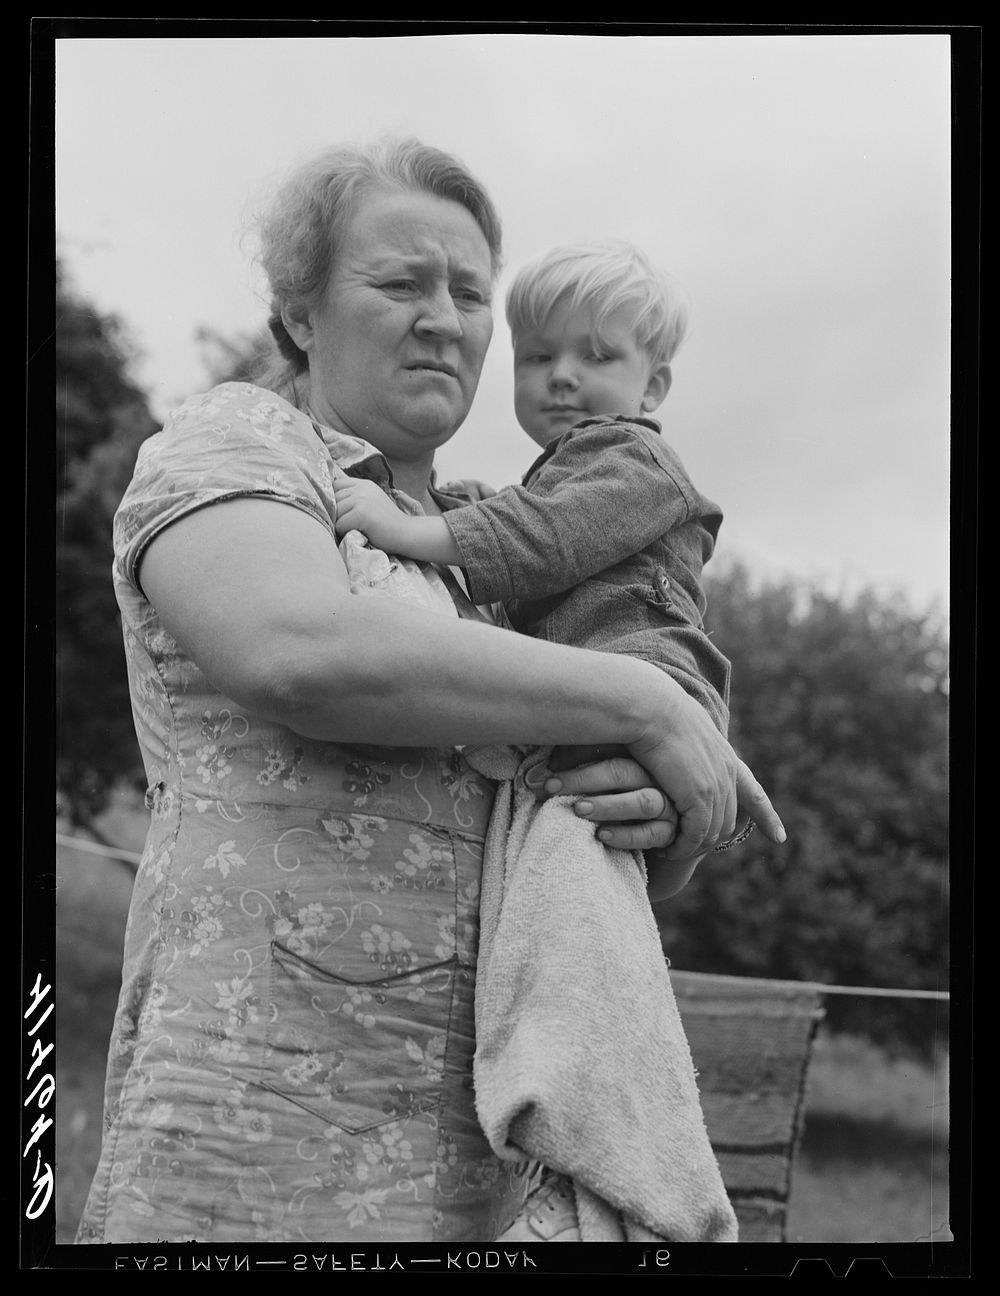 [Untitled photo, possibly related to: Farm woman holding one of her children in submarginal farm area of Rumsey Hill, near…